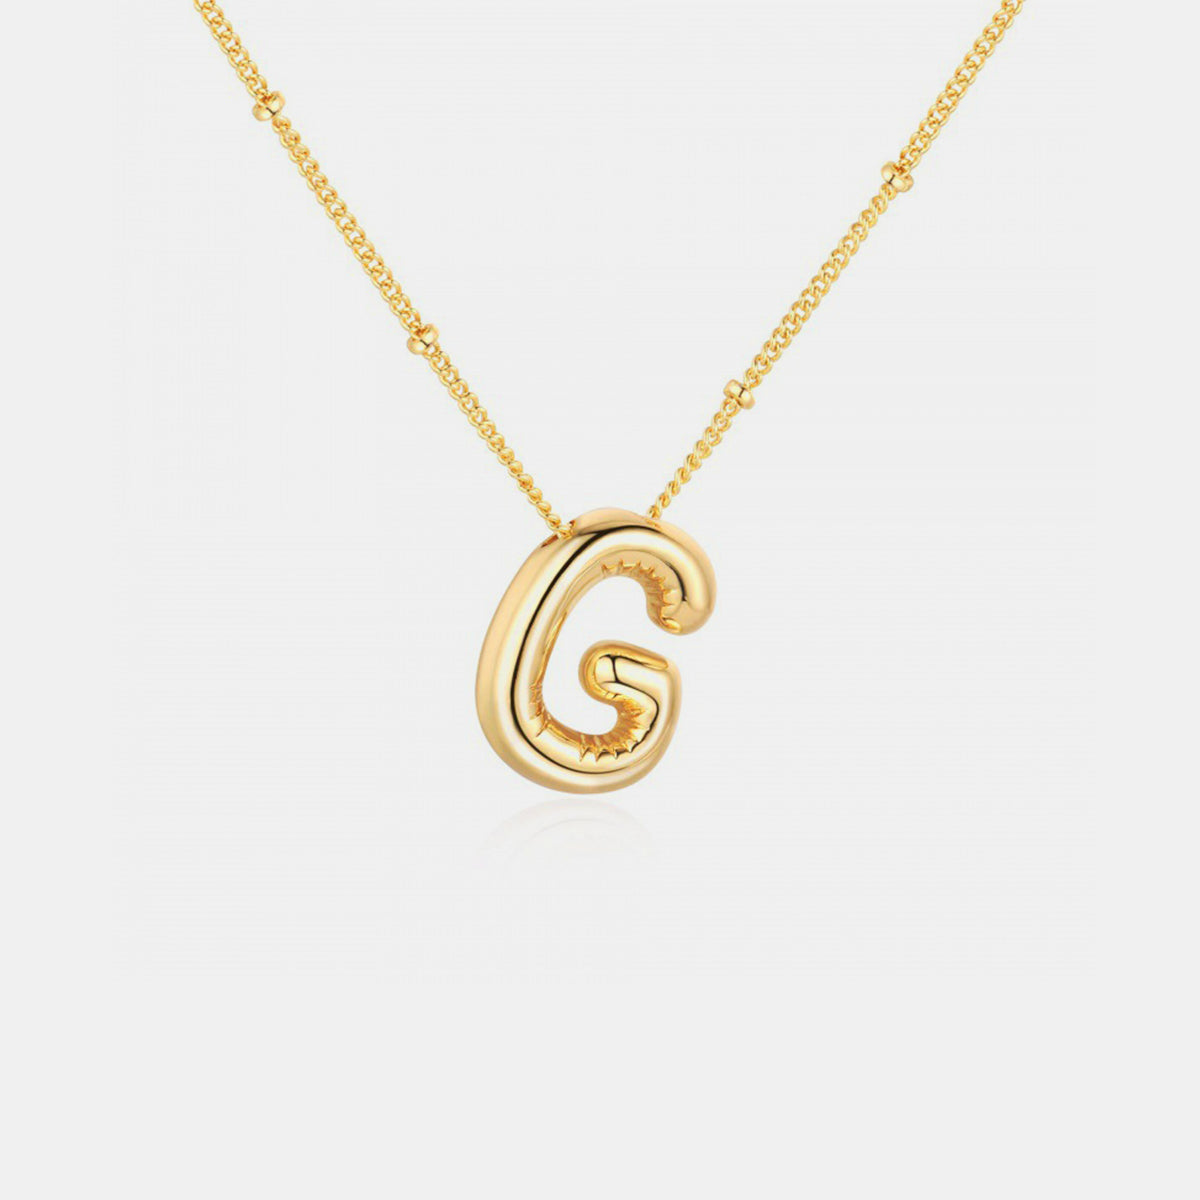 TEEK - A-J Gold-Plated Letter Necklace JEWELRY TEEK Trend Style G  